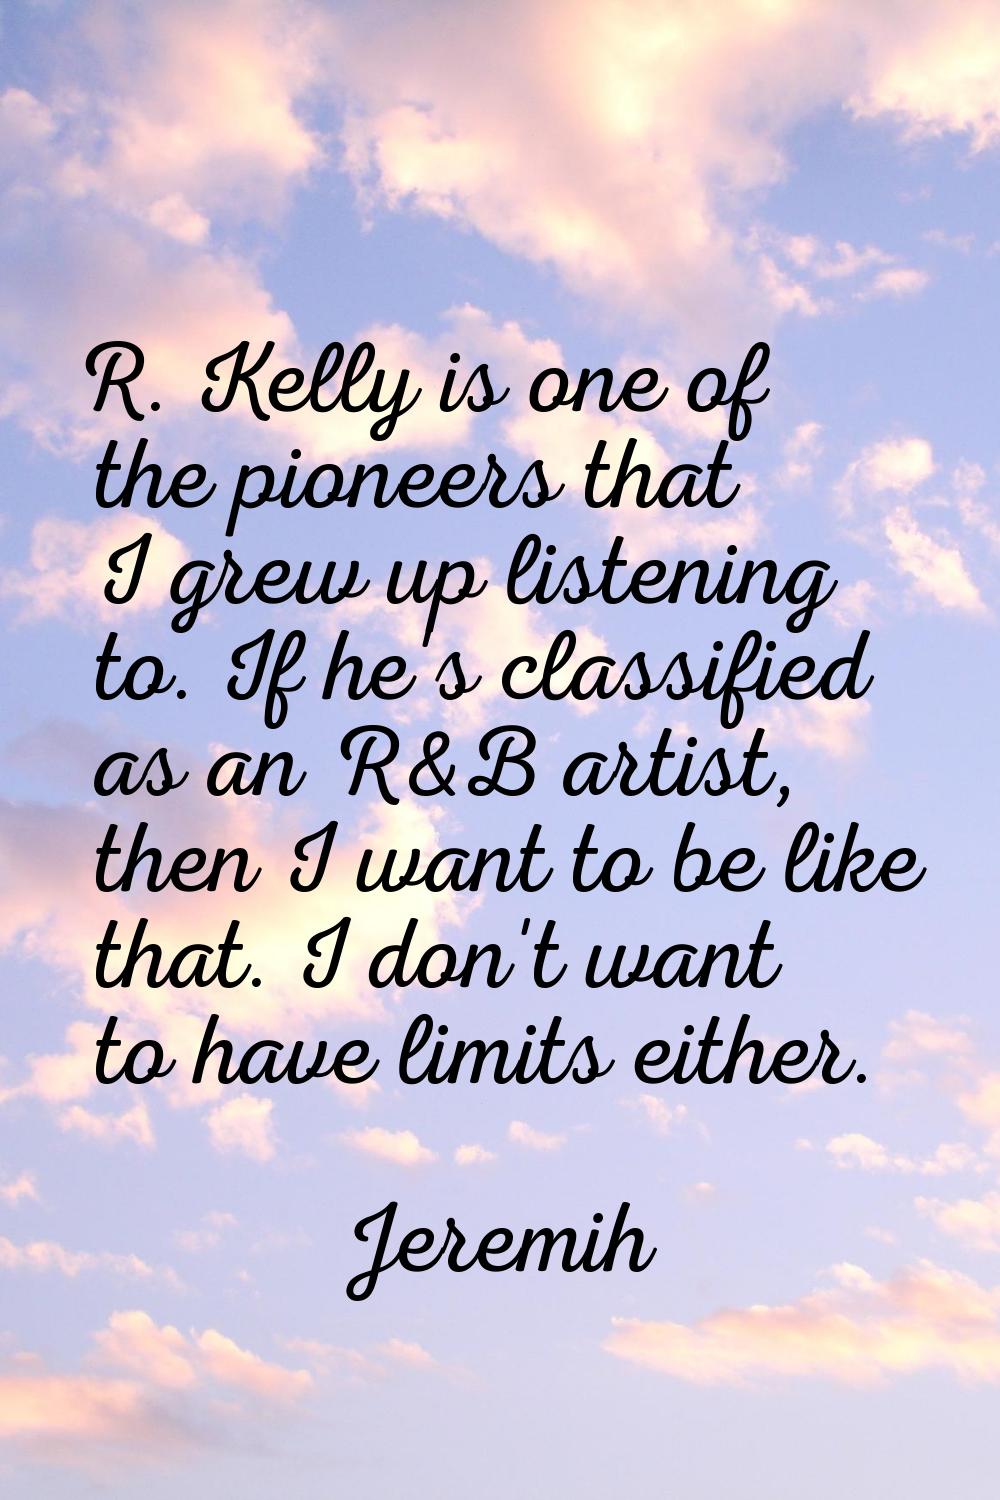 R. Kelly is one of the pioneers that I grew up listening to. If he's classified as an R&B artist, t